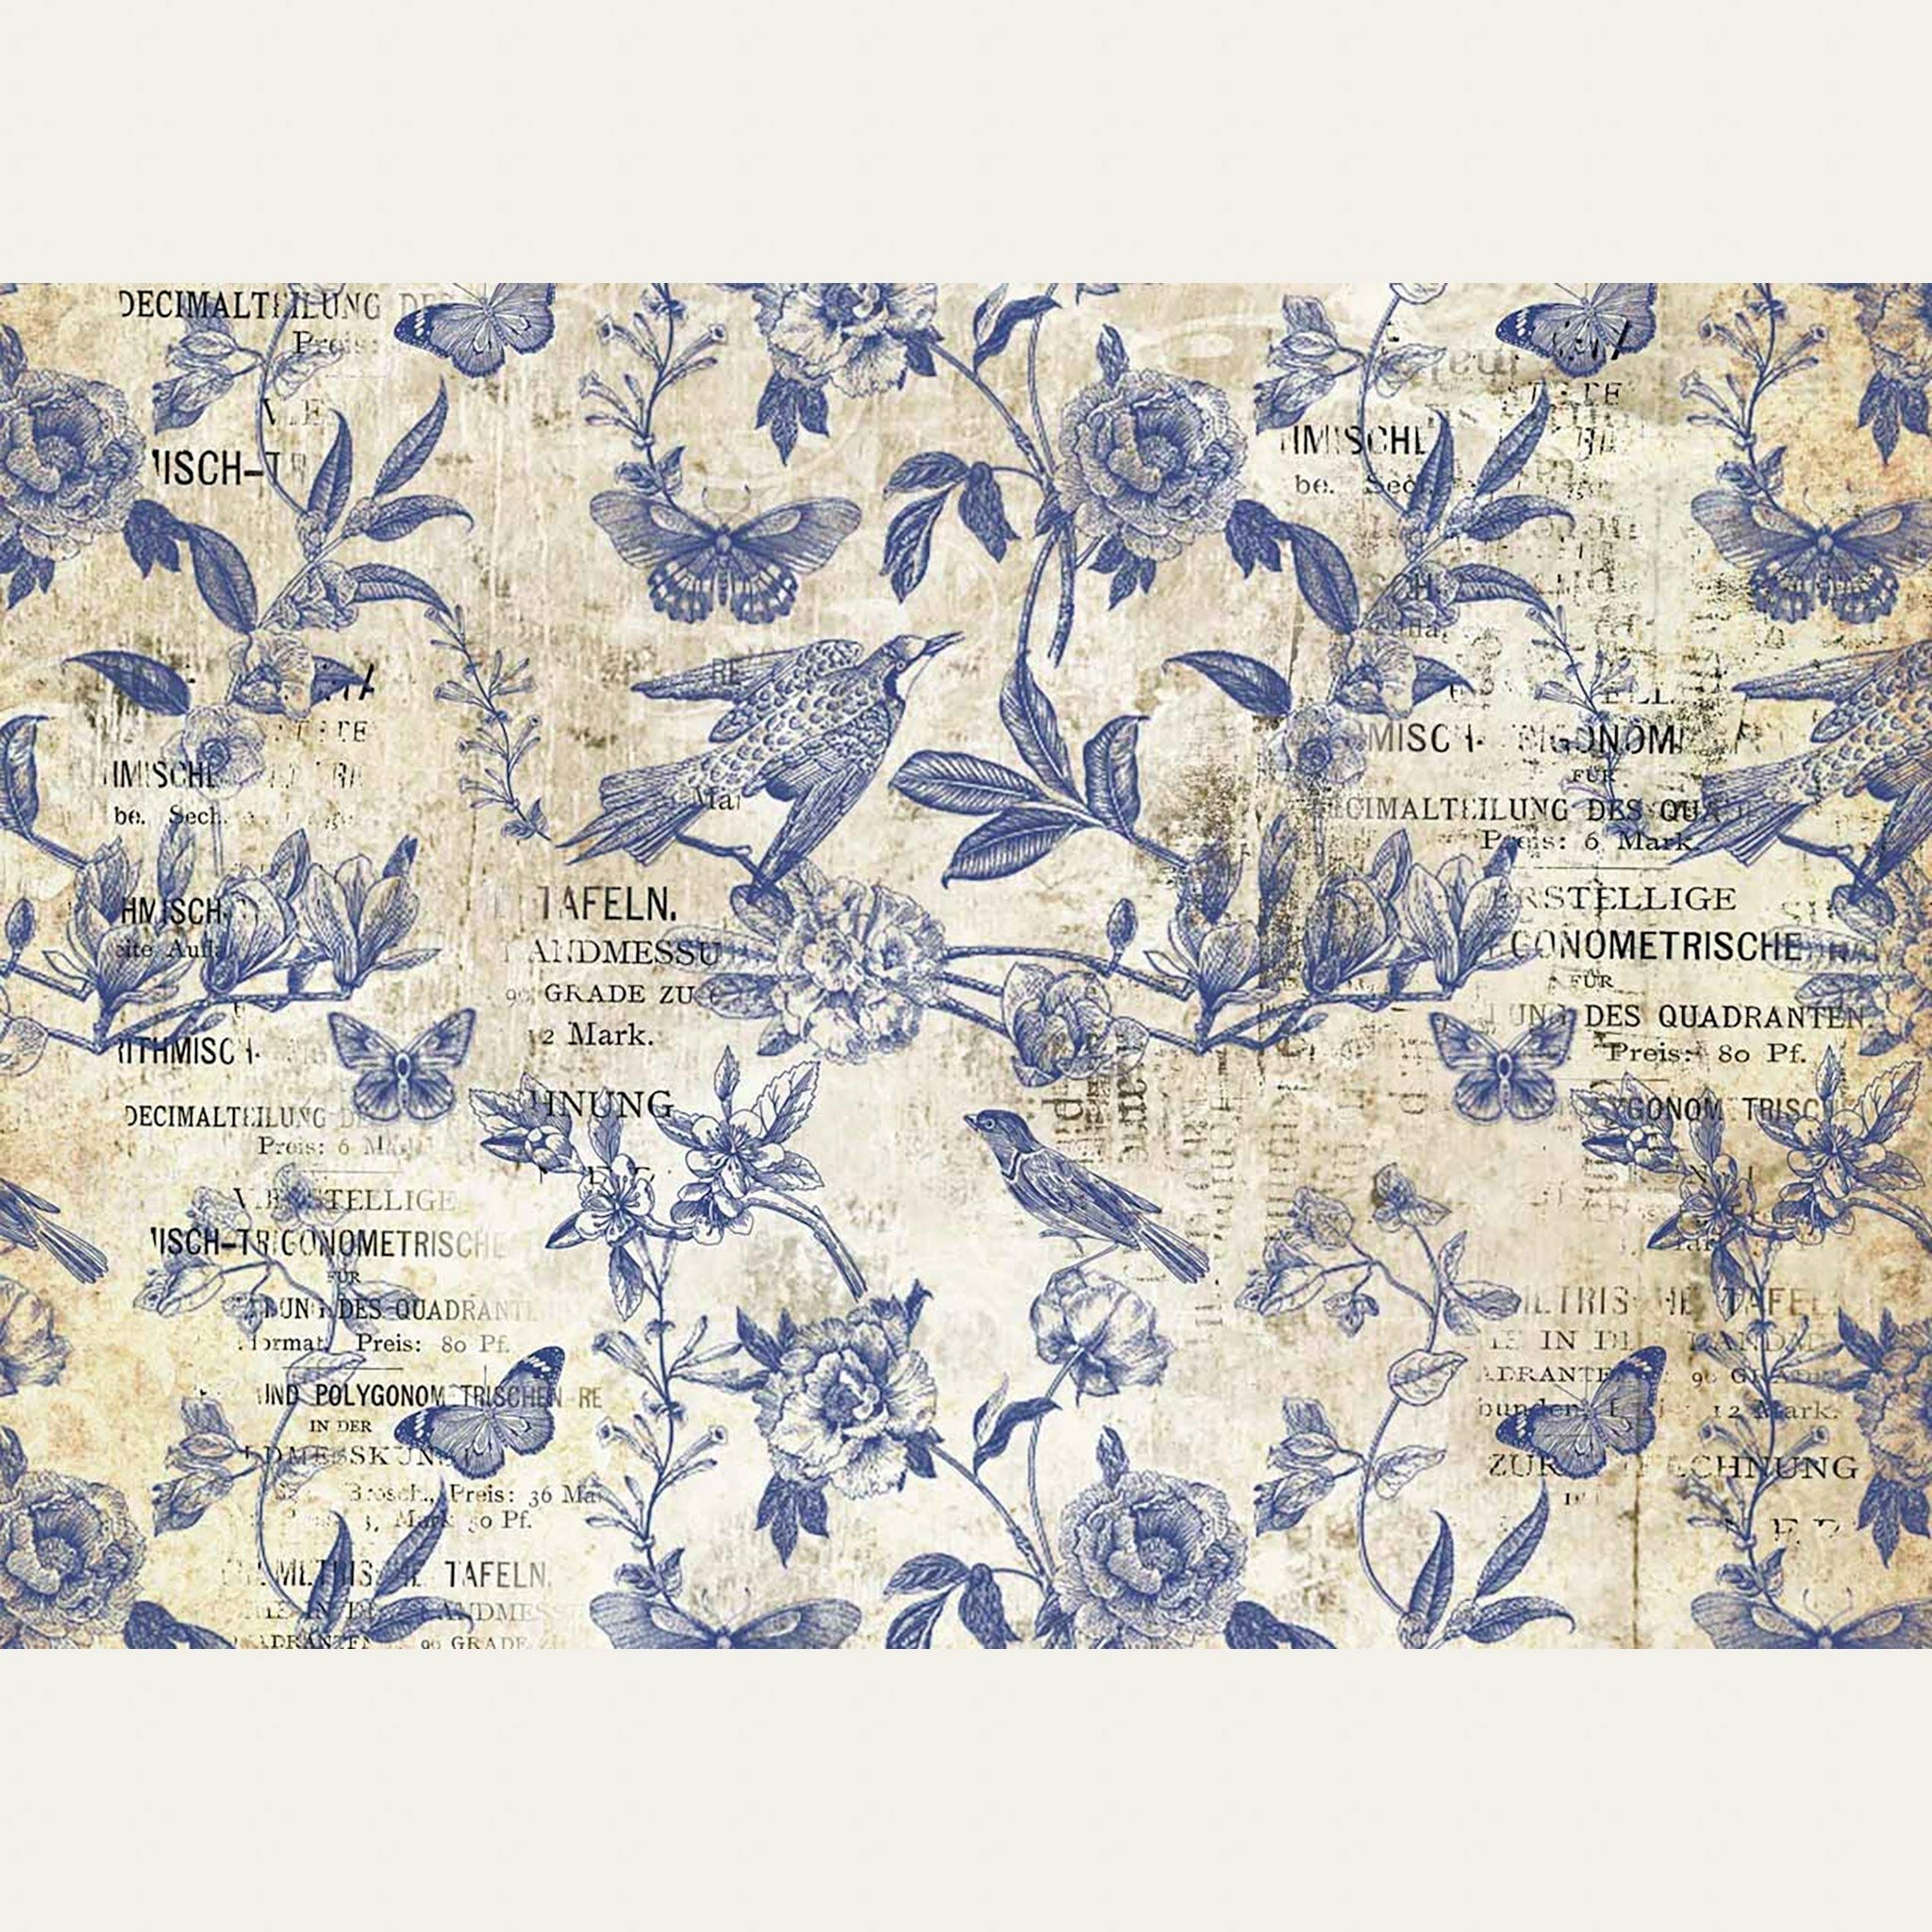 A0 rice paper design that features blue stamped birds, butterflies, and vining flowers on vintage magazine paper. White borders are on the top and bottom.